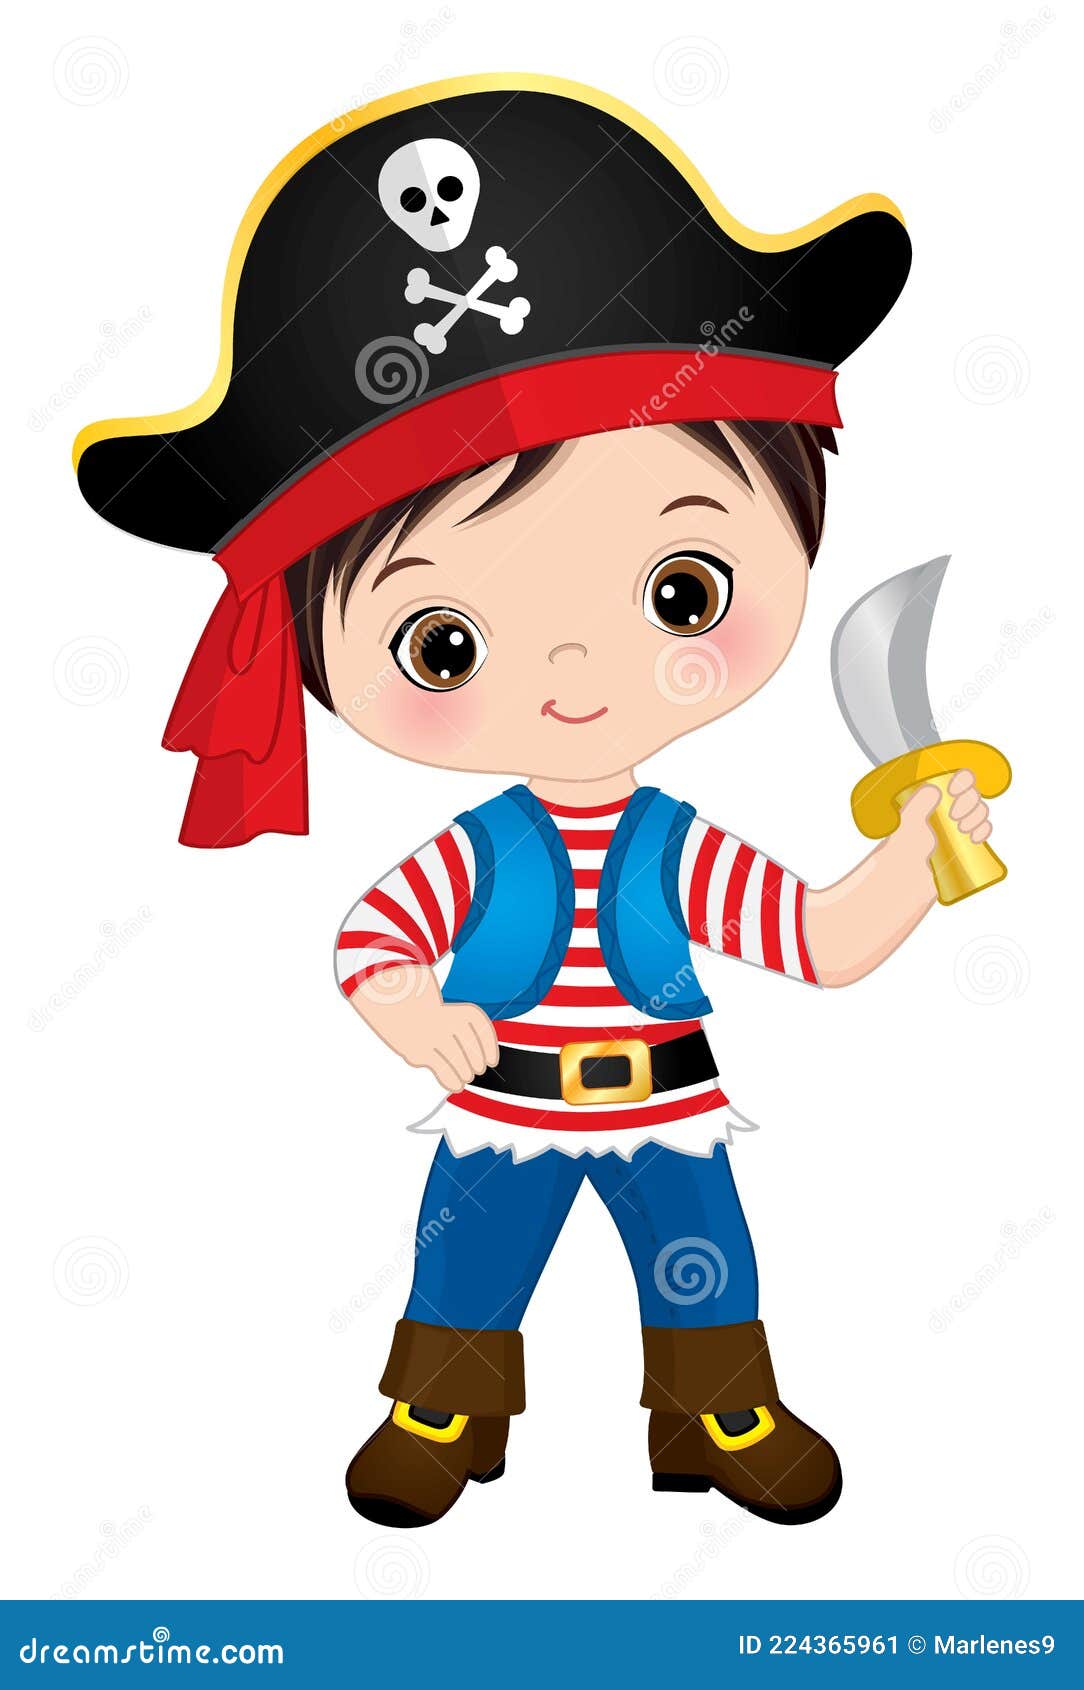 Cute Little Pirate Holding Knife. Vector Stock Vector - Illustration of clipart, child: 224365961